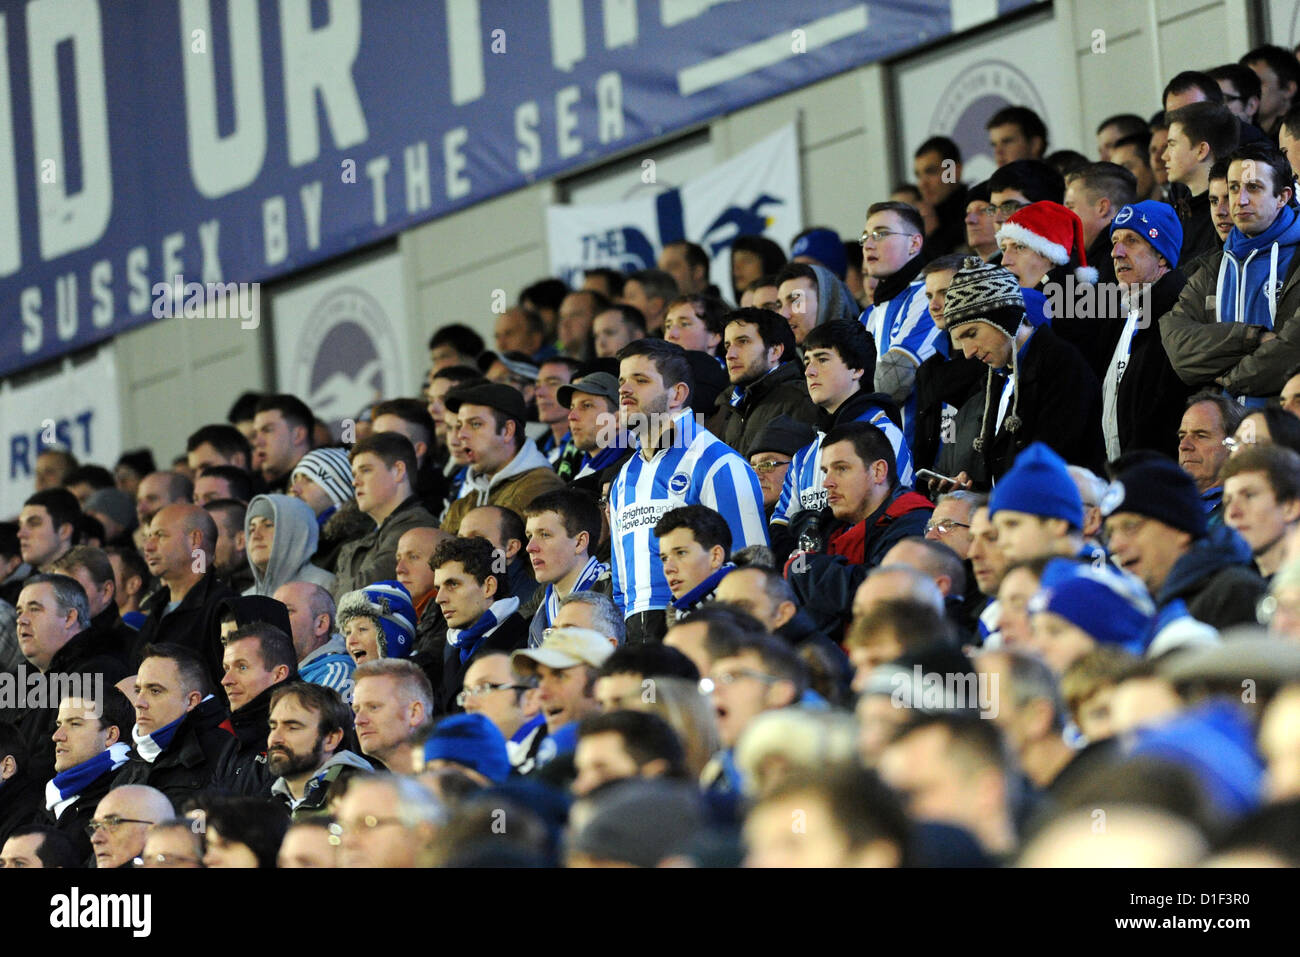 Brighton and Hove Albion football fans standing to watch a match at The Amex Stadium -  Editorial use only. No merchandising. For Football images FA and Premier League restrictions apply inc. no internet/mobile usage without FAPL license - for details contact Football Dataco Stock Photo